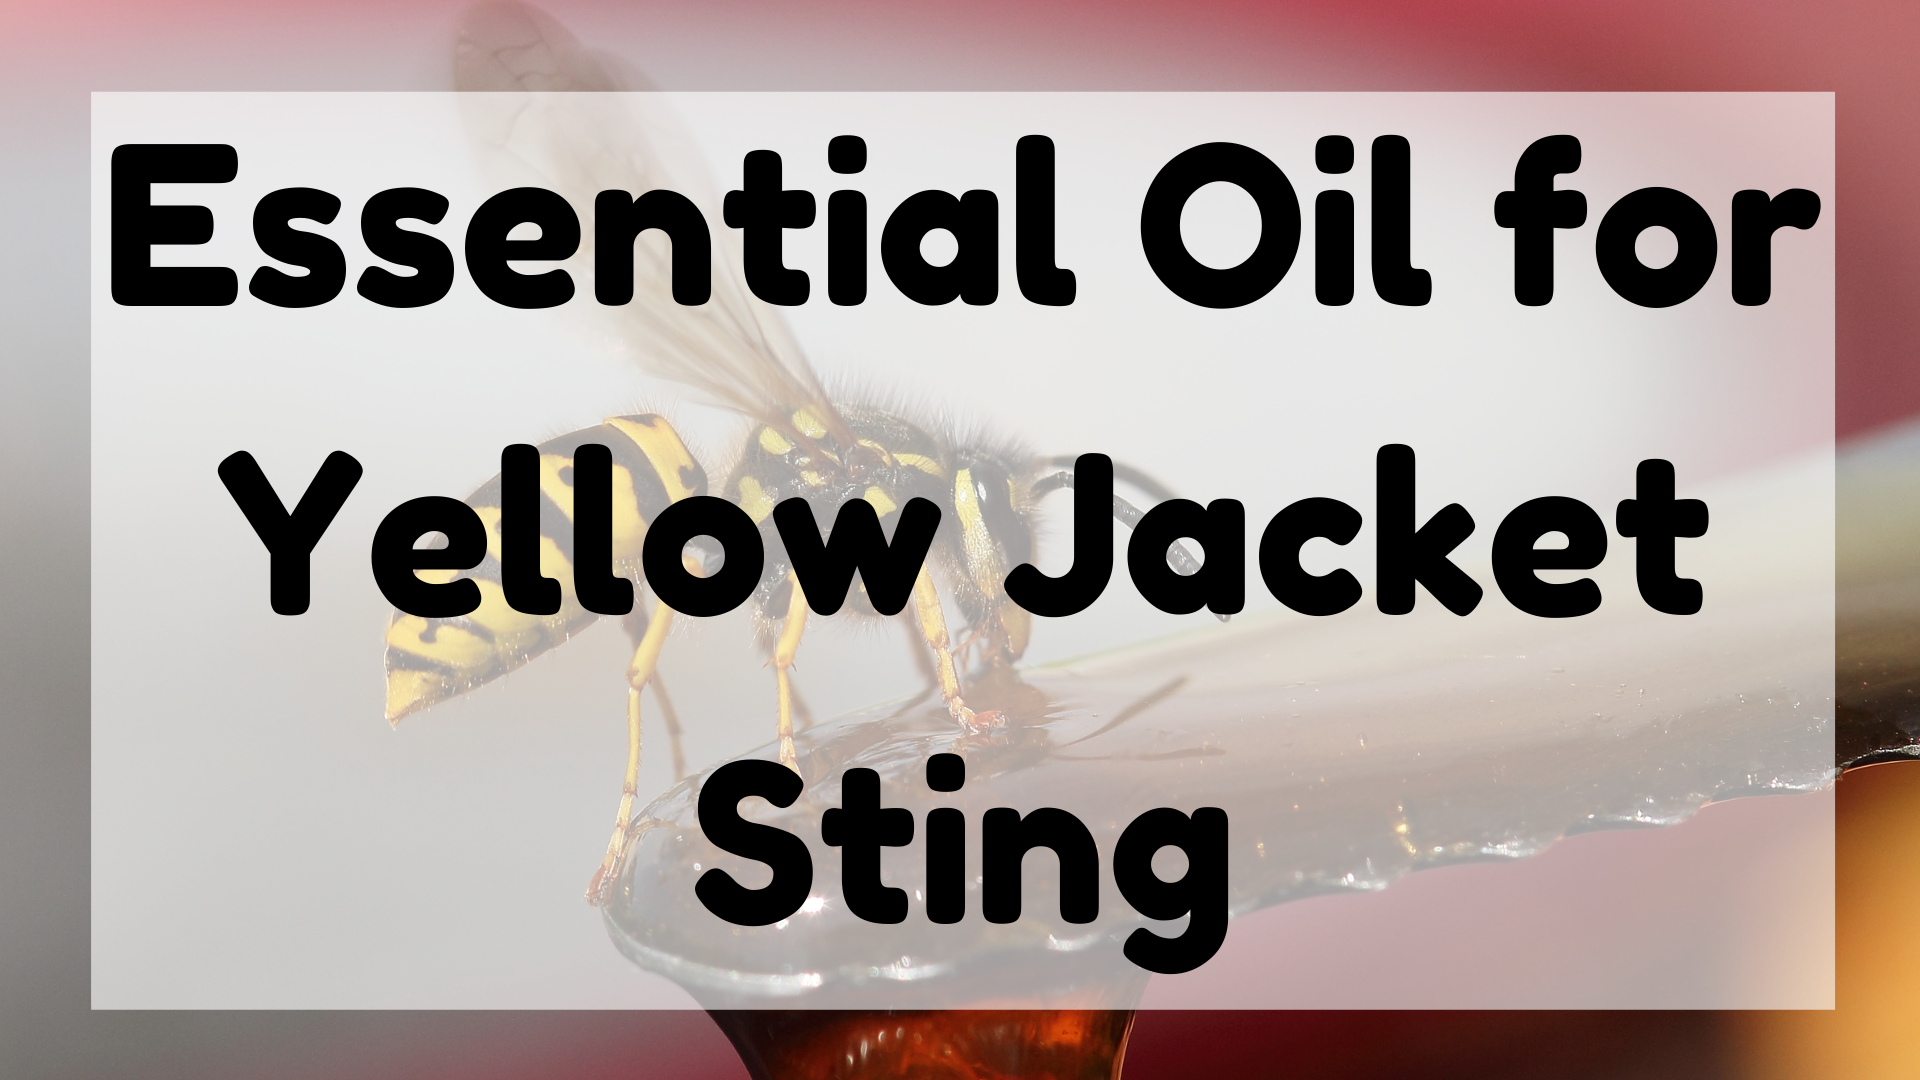 Essential Oil For Yellow Jacket Sting